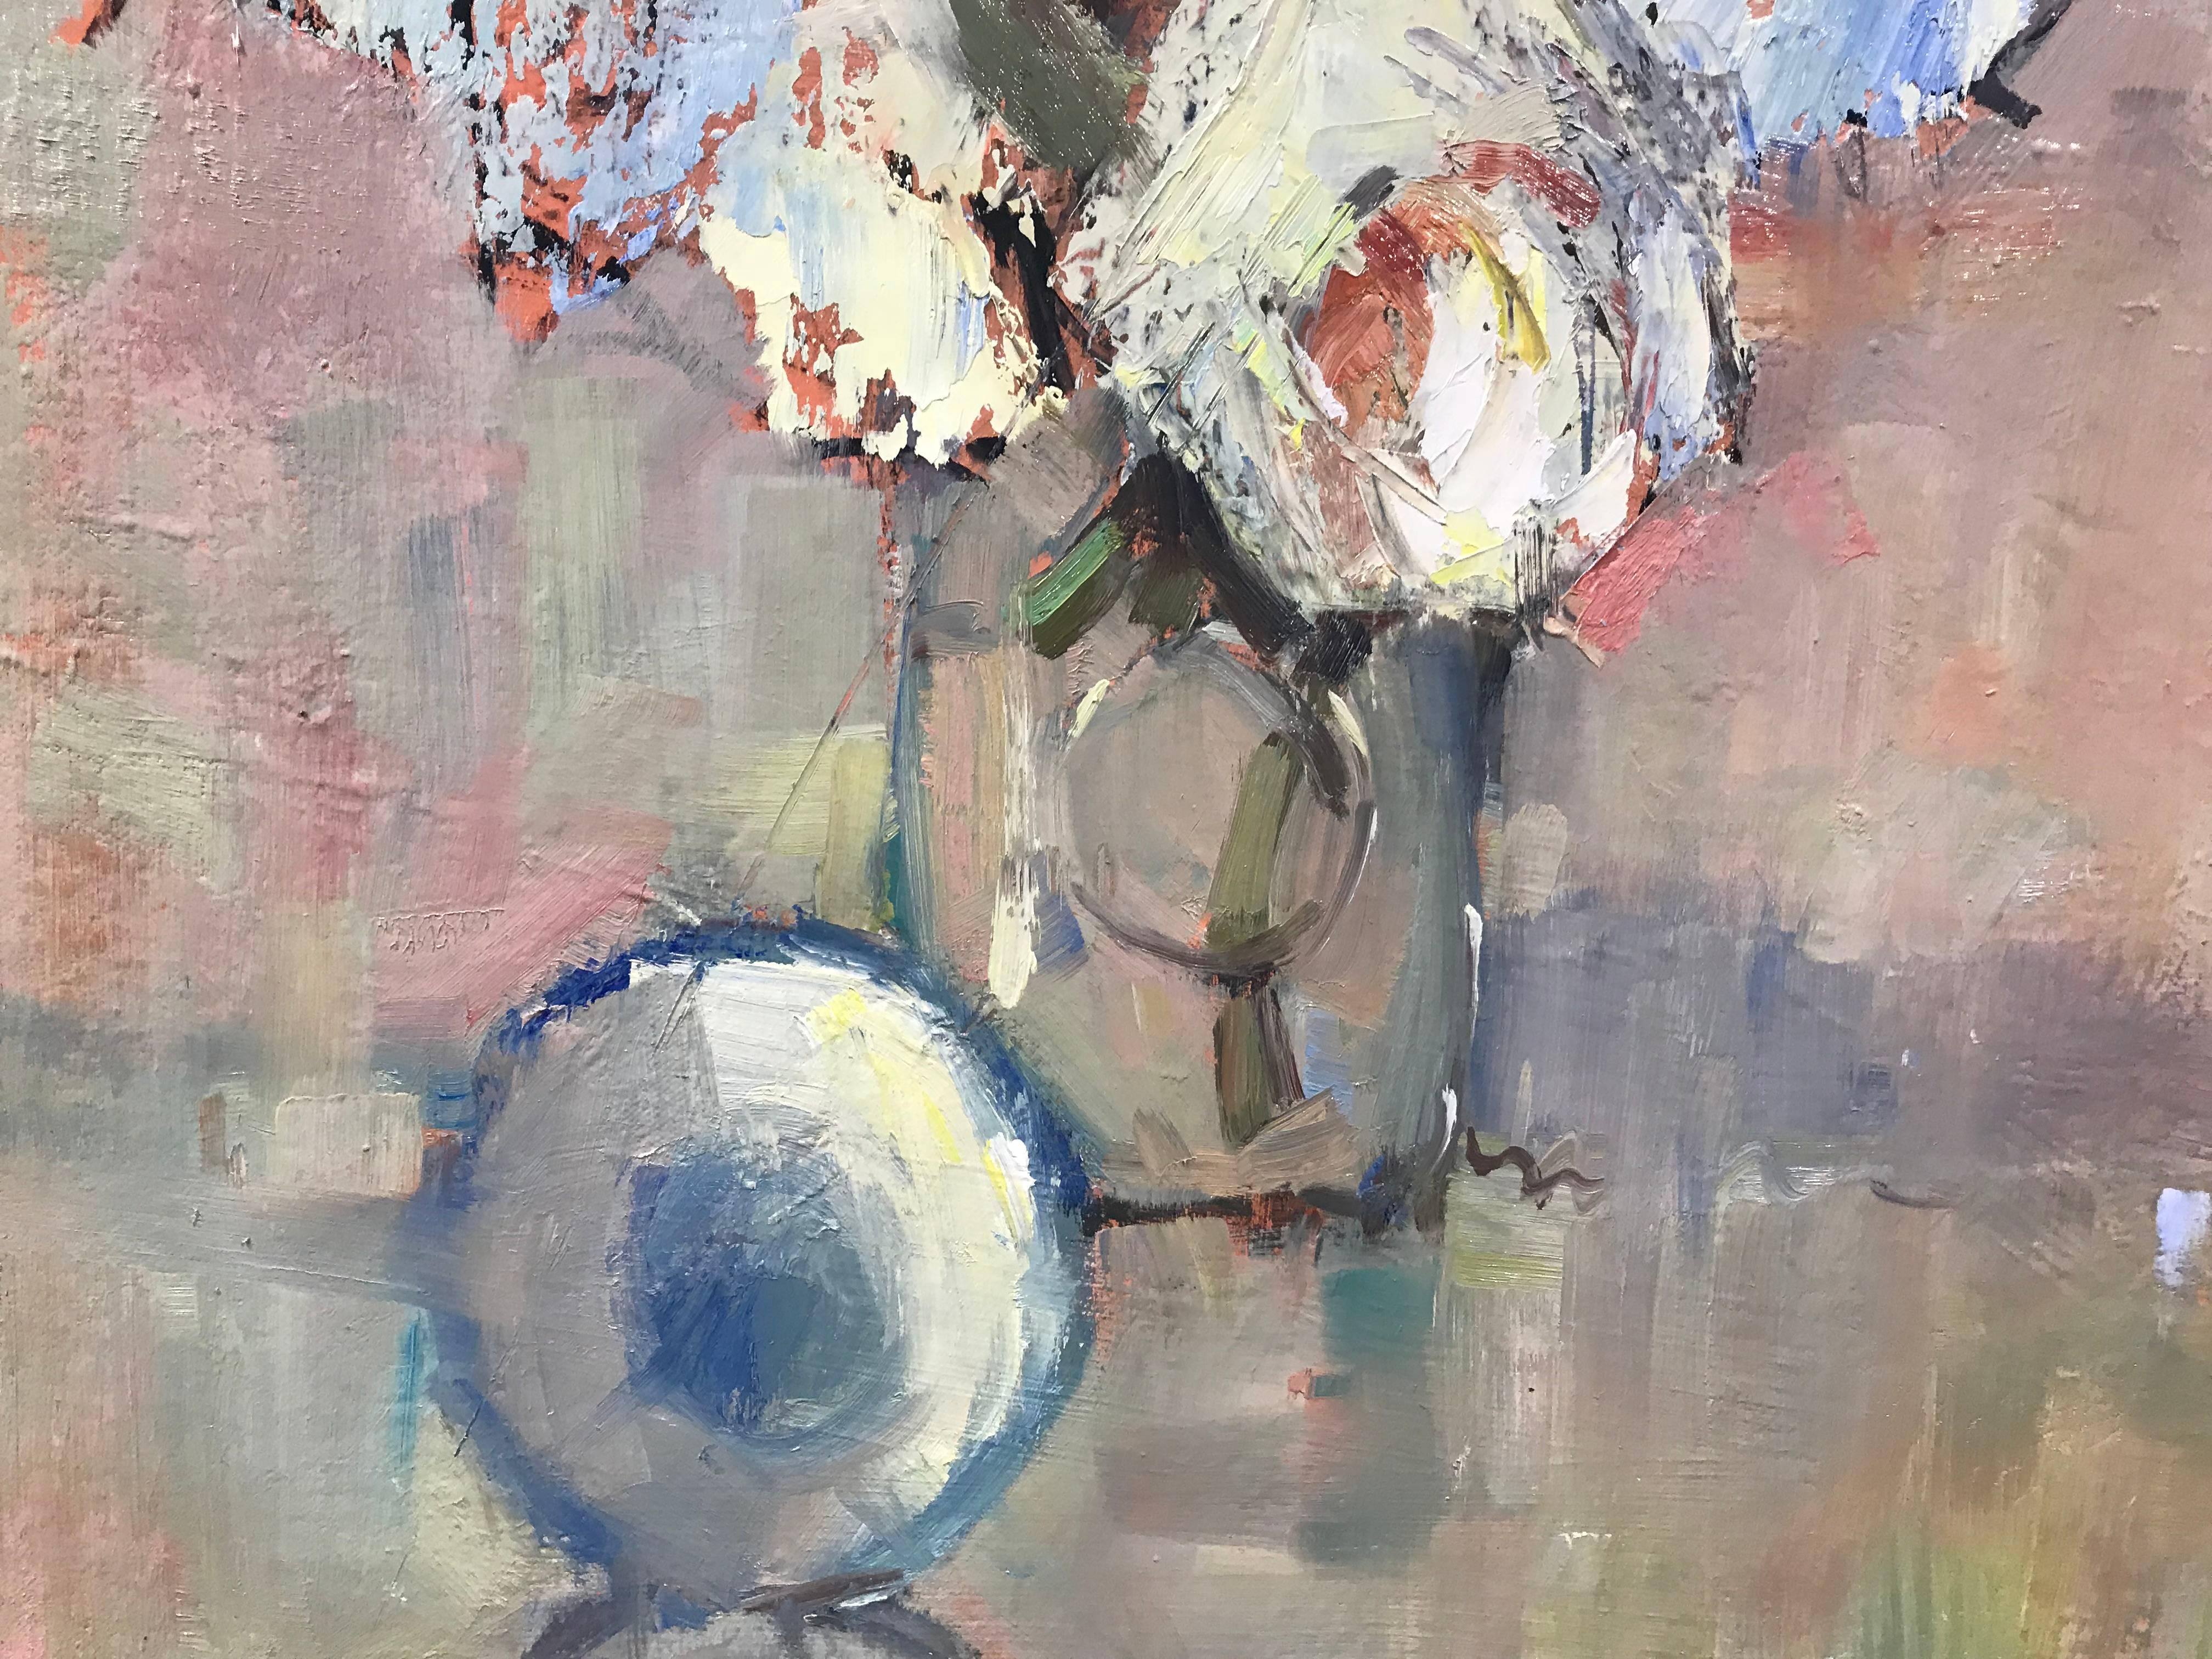 'Revelation' is a framed Impressionist oil on linen board painting created by American artist Nancy Franke in 2018. Franke gives here an elegant rendition of a bouquet of white flowers set inside a glass vase, depicted on a soft pink background. A